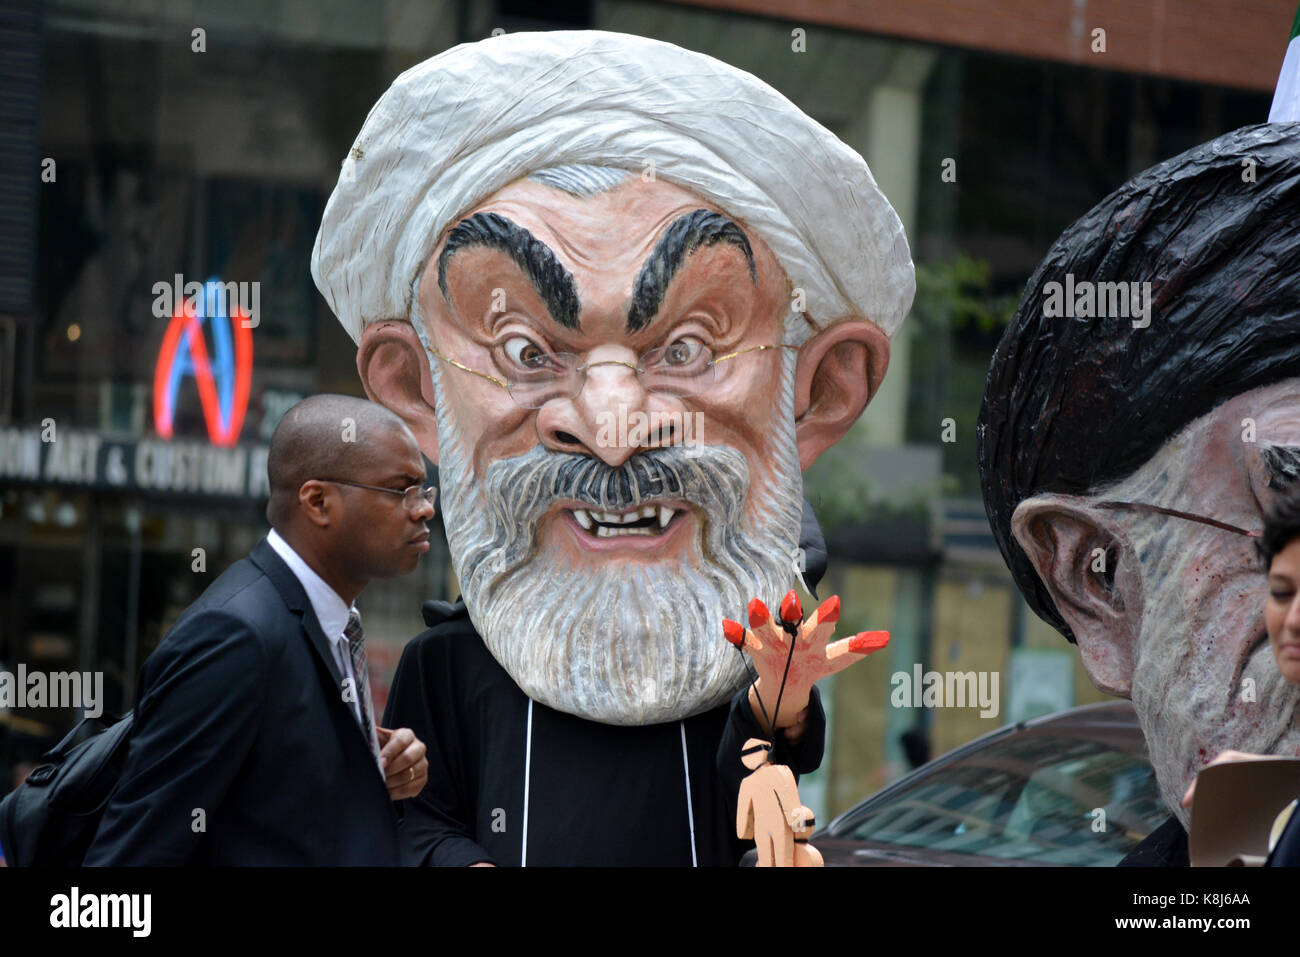 People dressed up as Iranian President Hassan Rouhani and Ali Hosseini Khamenei during the United Nations General Assembly in Manhattan. Stock Photo